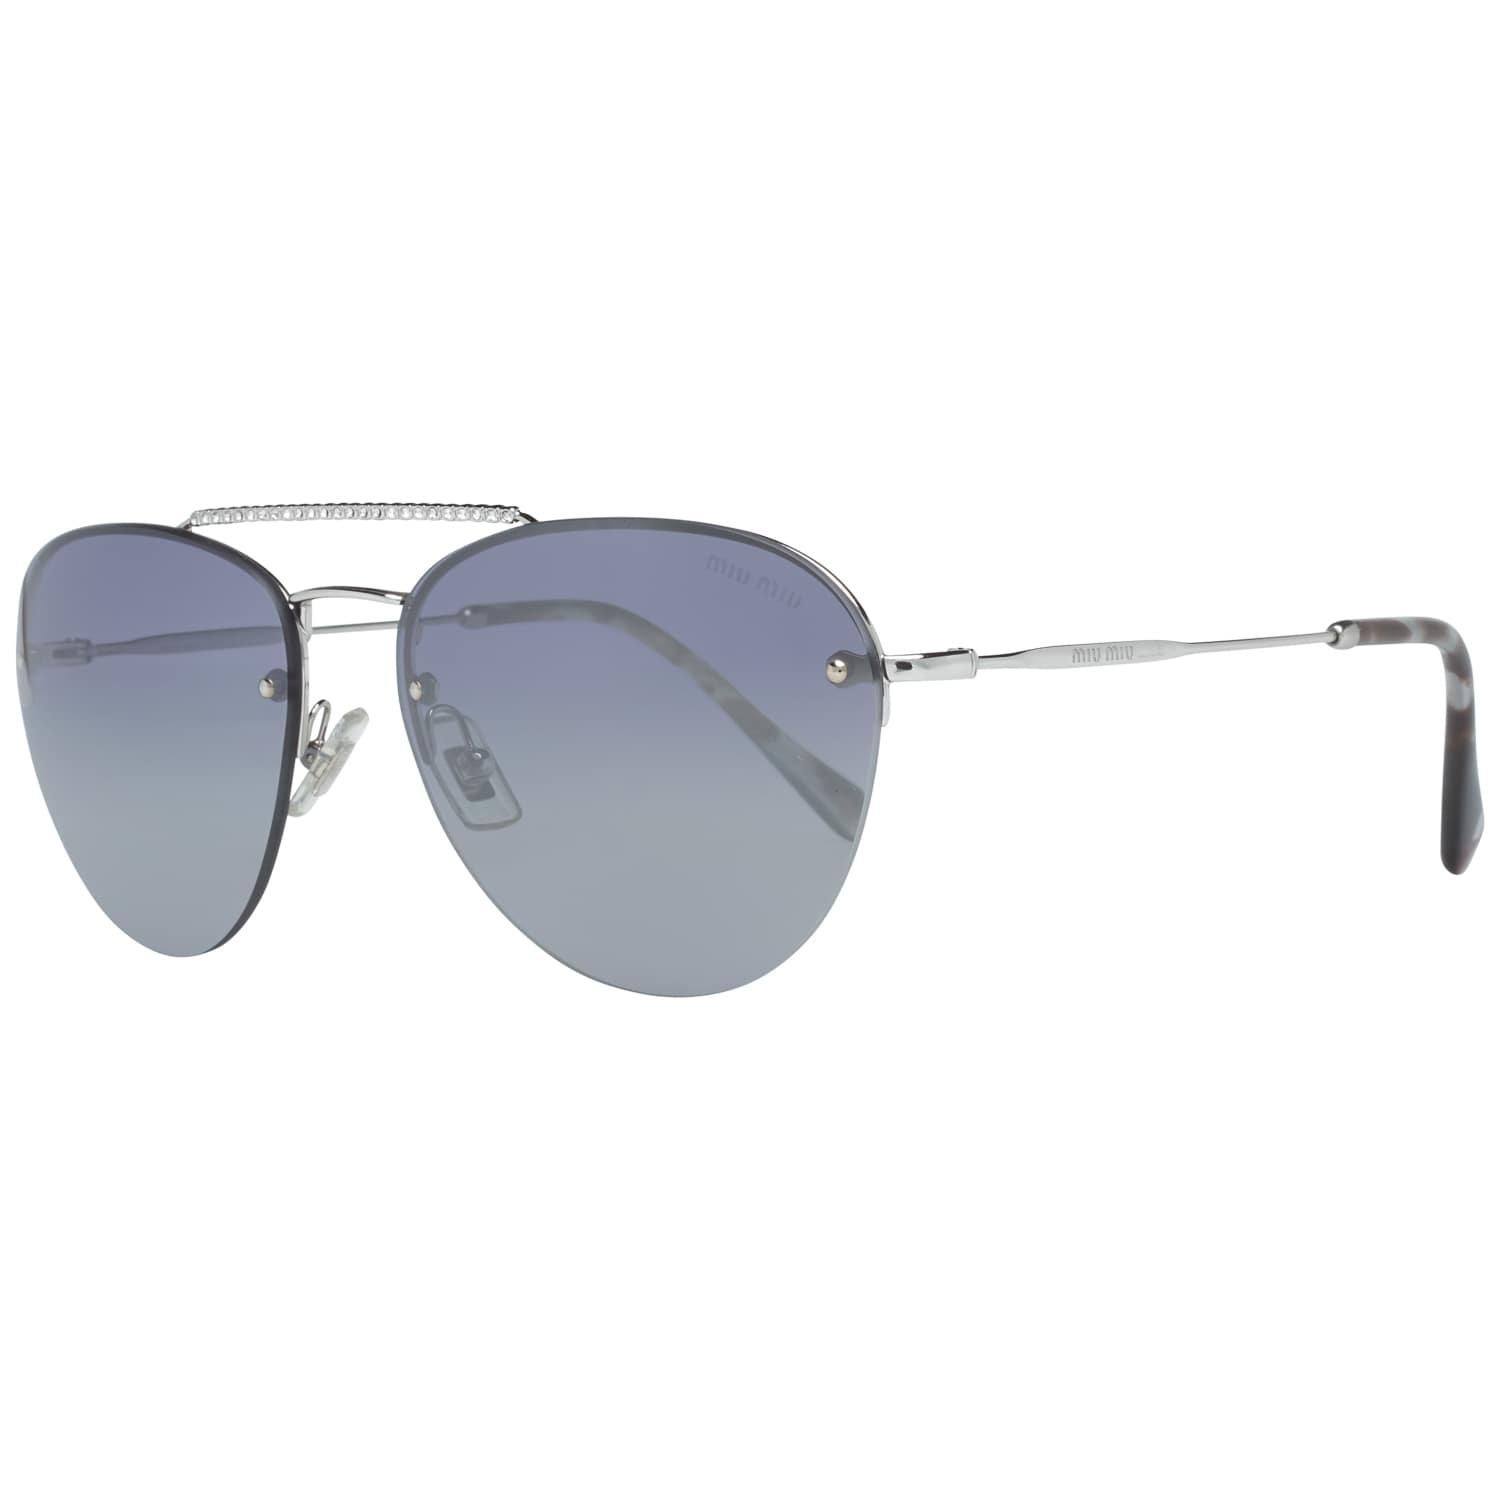 Details

MATERIAL: Metal

COLOR: Silver

MODEL: MU54US 1BC3A059

GENDER: Women

COUNTRY OF MANUFACTURE: Italy

TYPE: Sunglasses

ORIGINAL CASE?: Yes

STYLE: Aviator

OCCASION: Casual

FEATURES: Lightweight

LENS COLOR: Blue

LENS TECHNOLOGY: